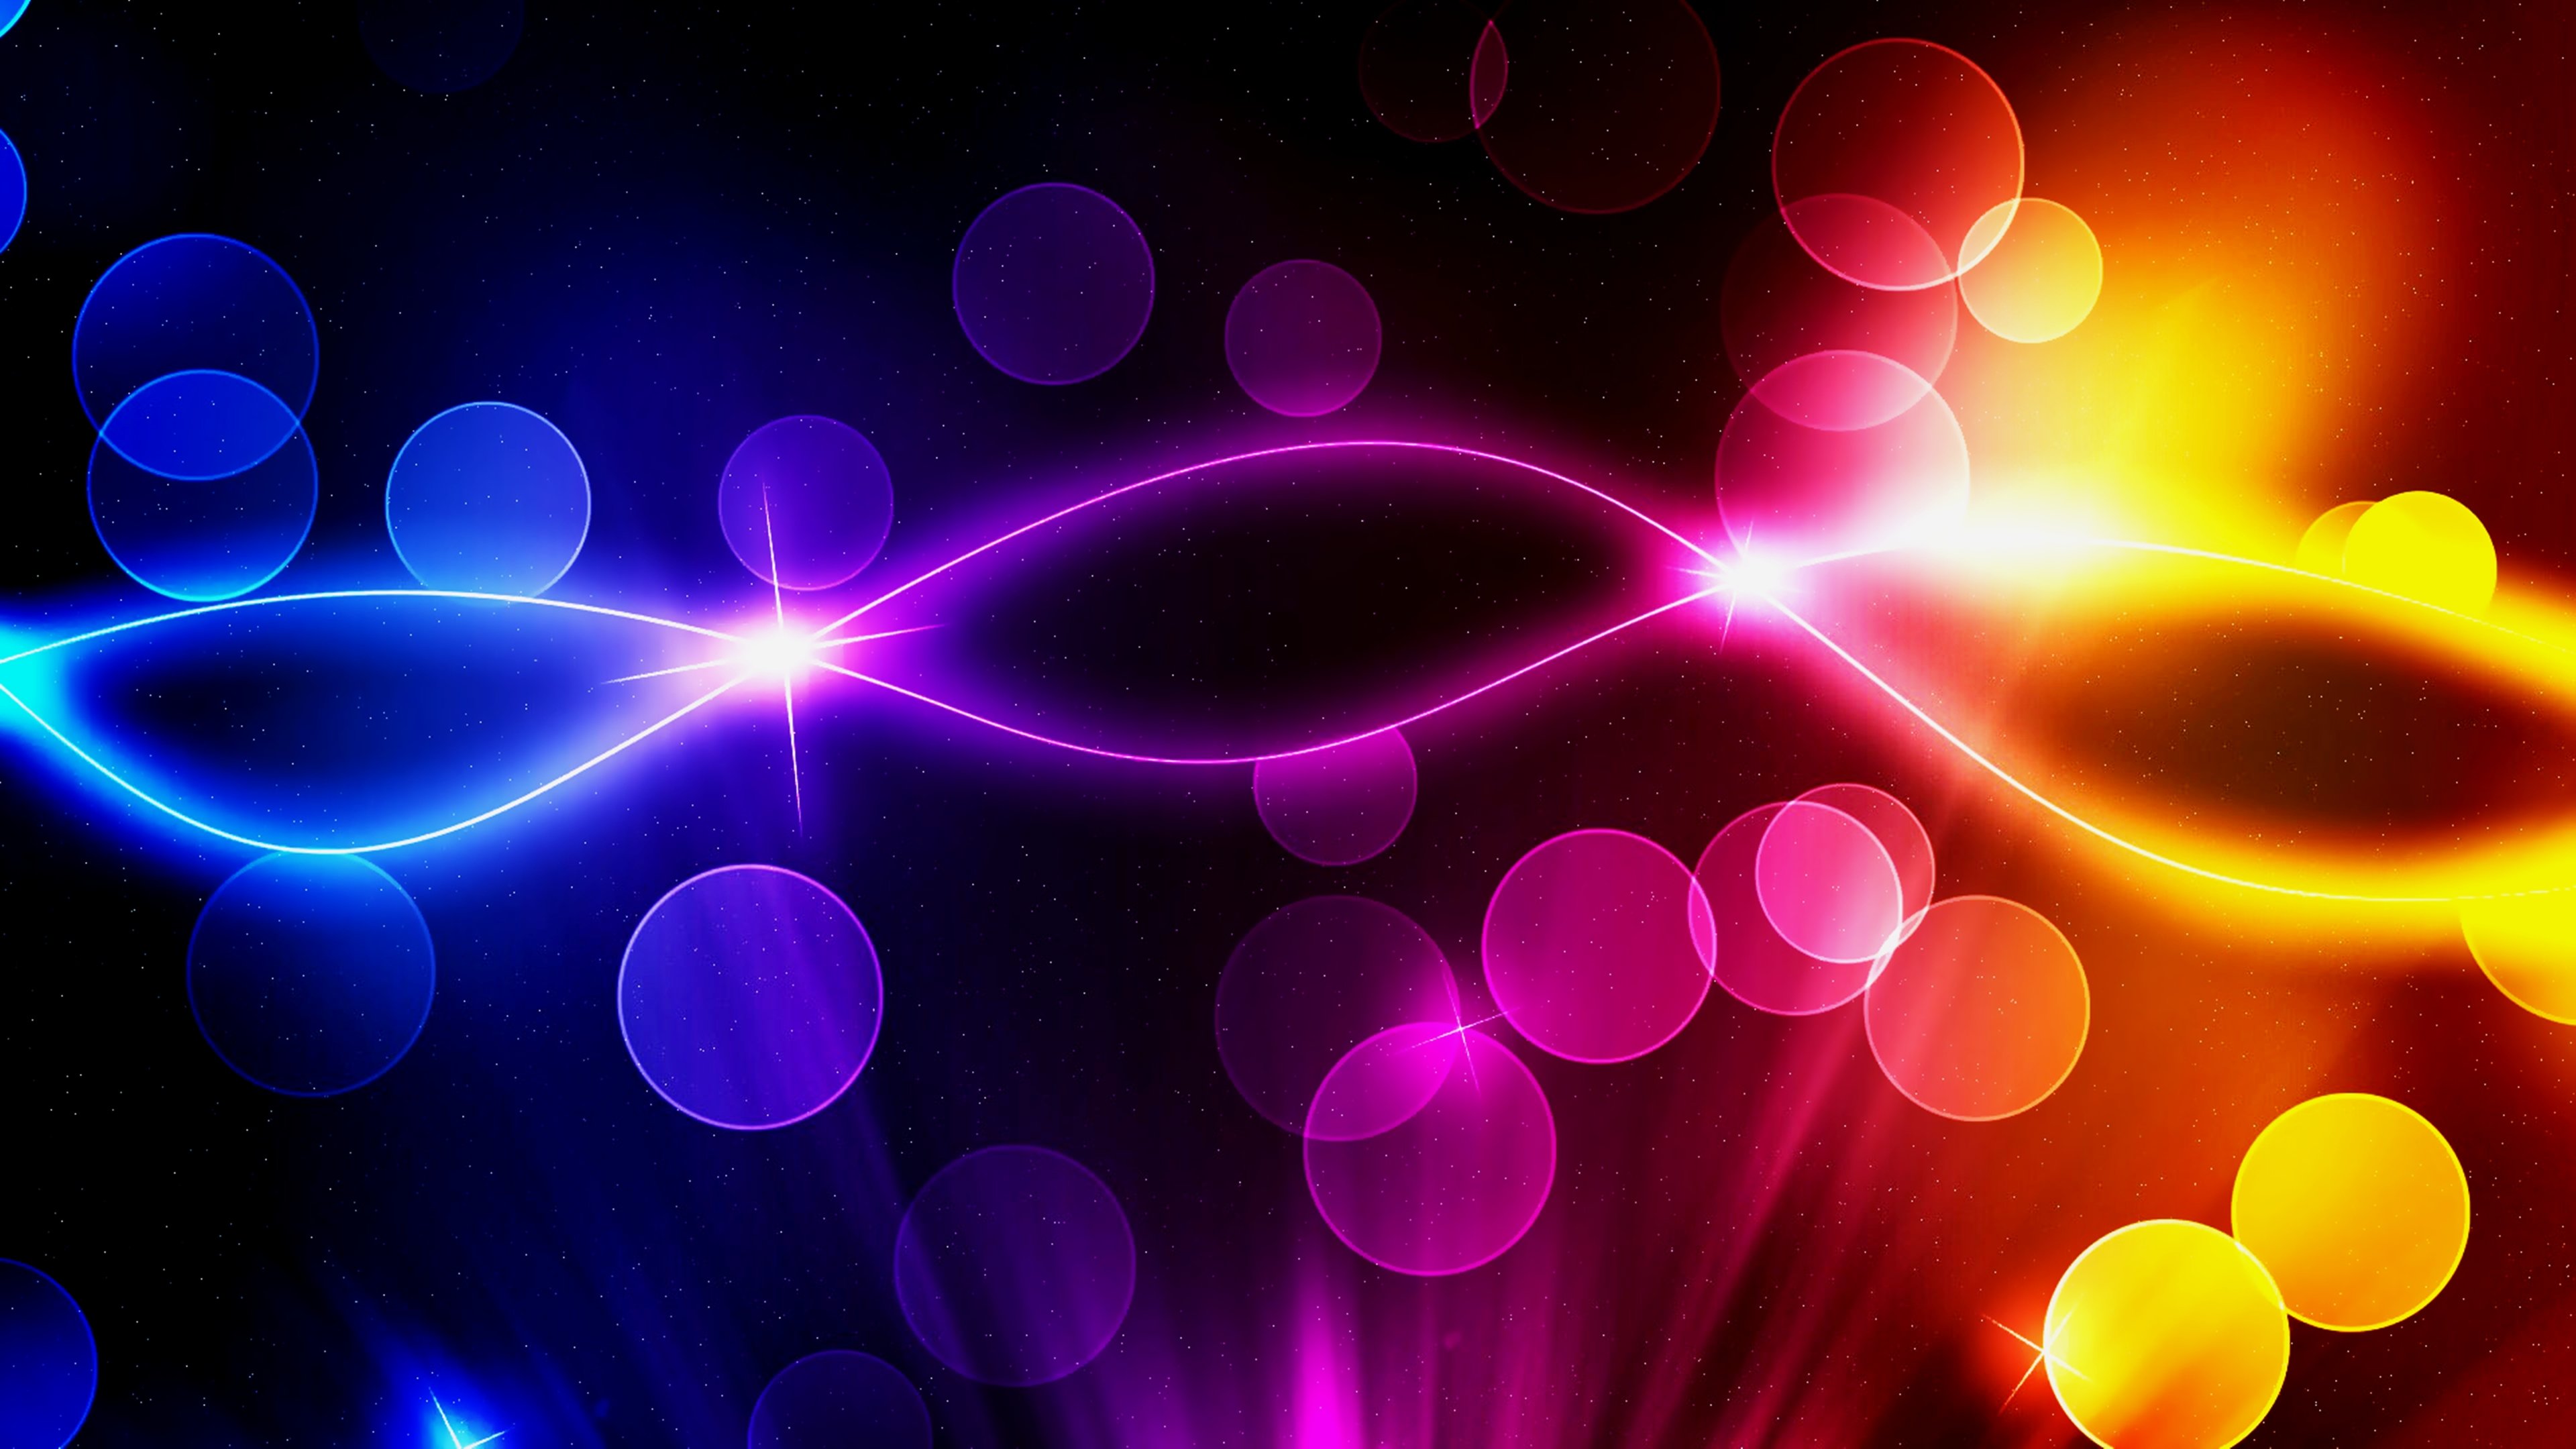 abstract, Art, Background, Blue, Colorful, Colors, Stars, Glowing, Neon, Wallpapers, Desktop